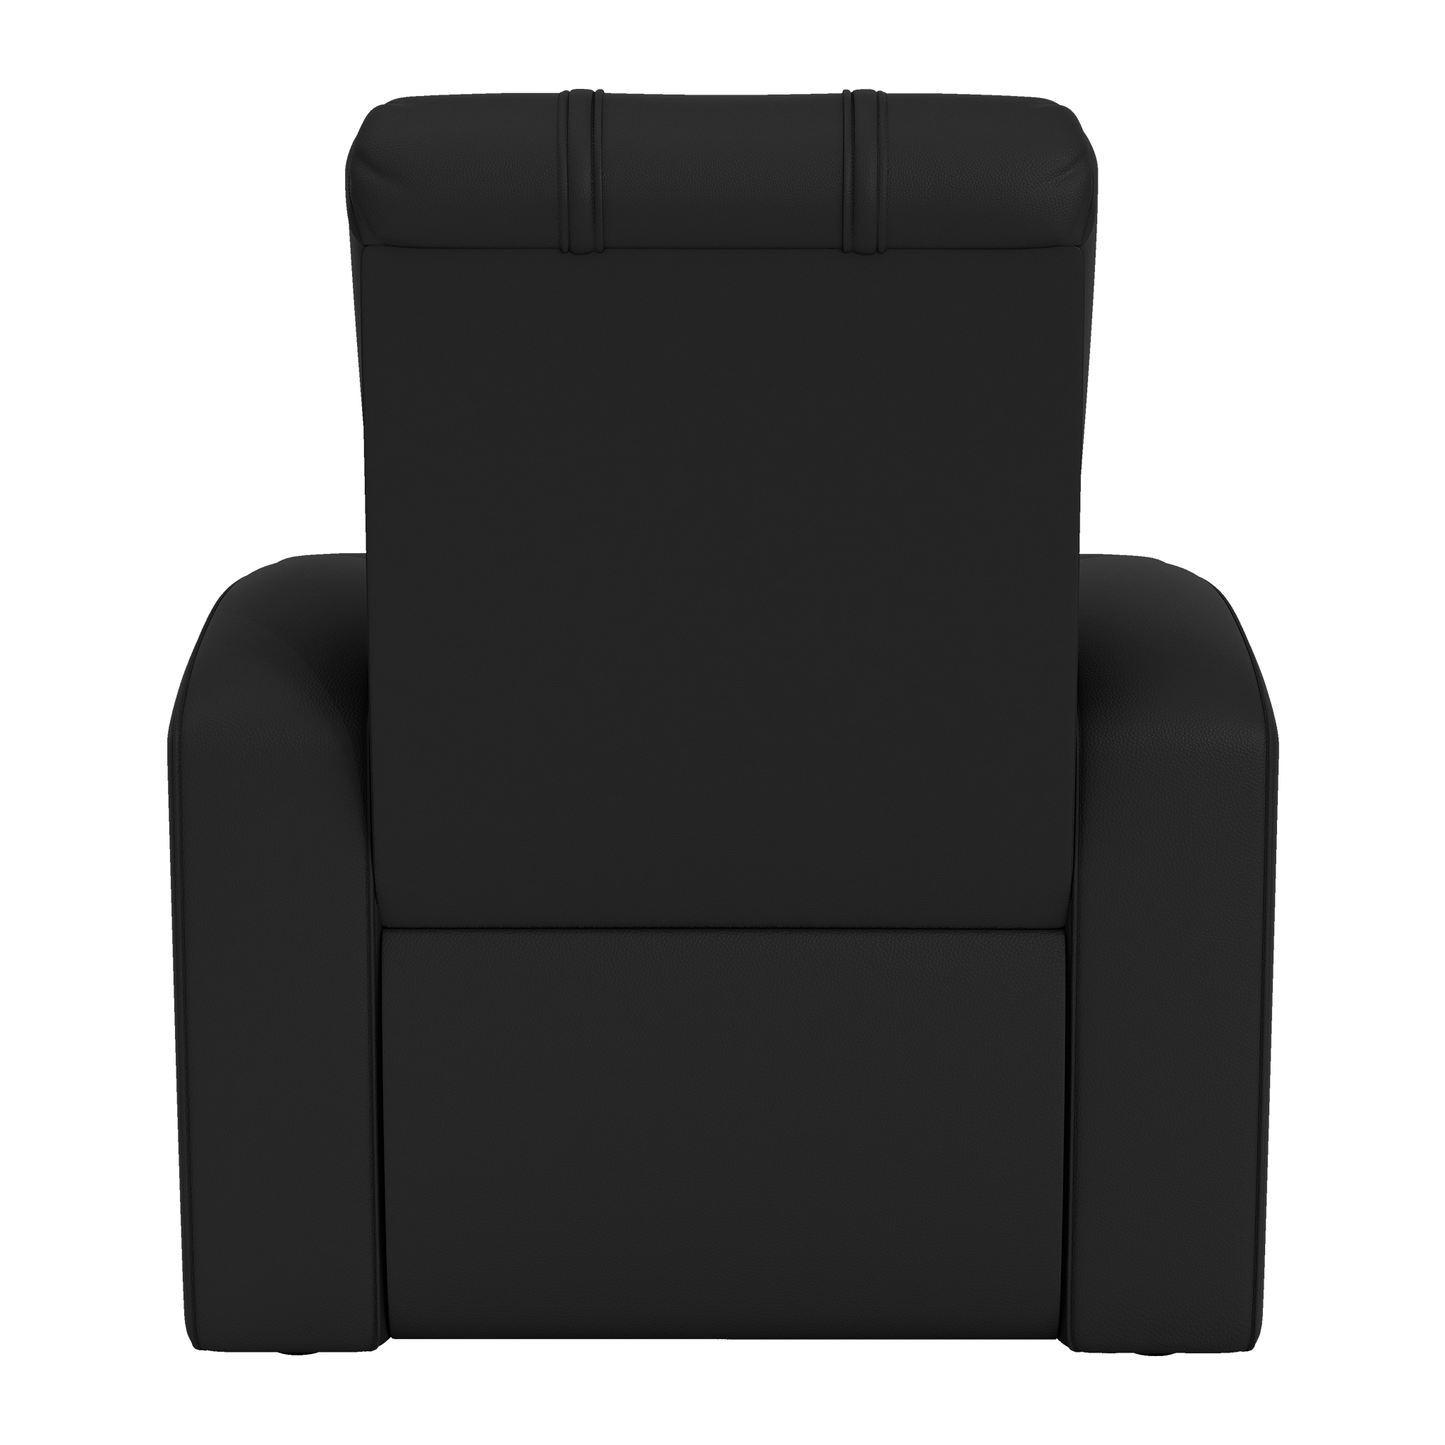 Relax Home Theater Recliner with 8oki Icon Logo